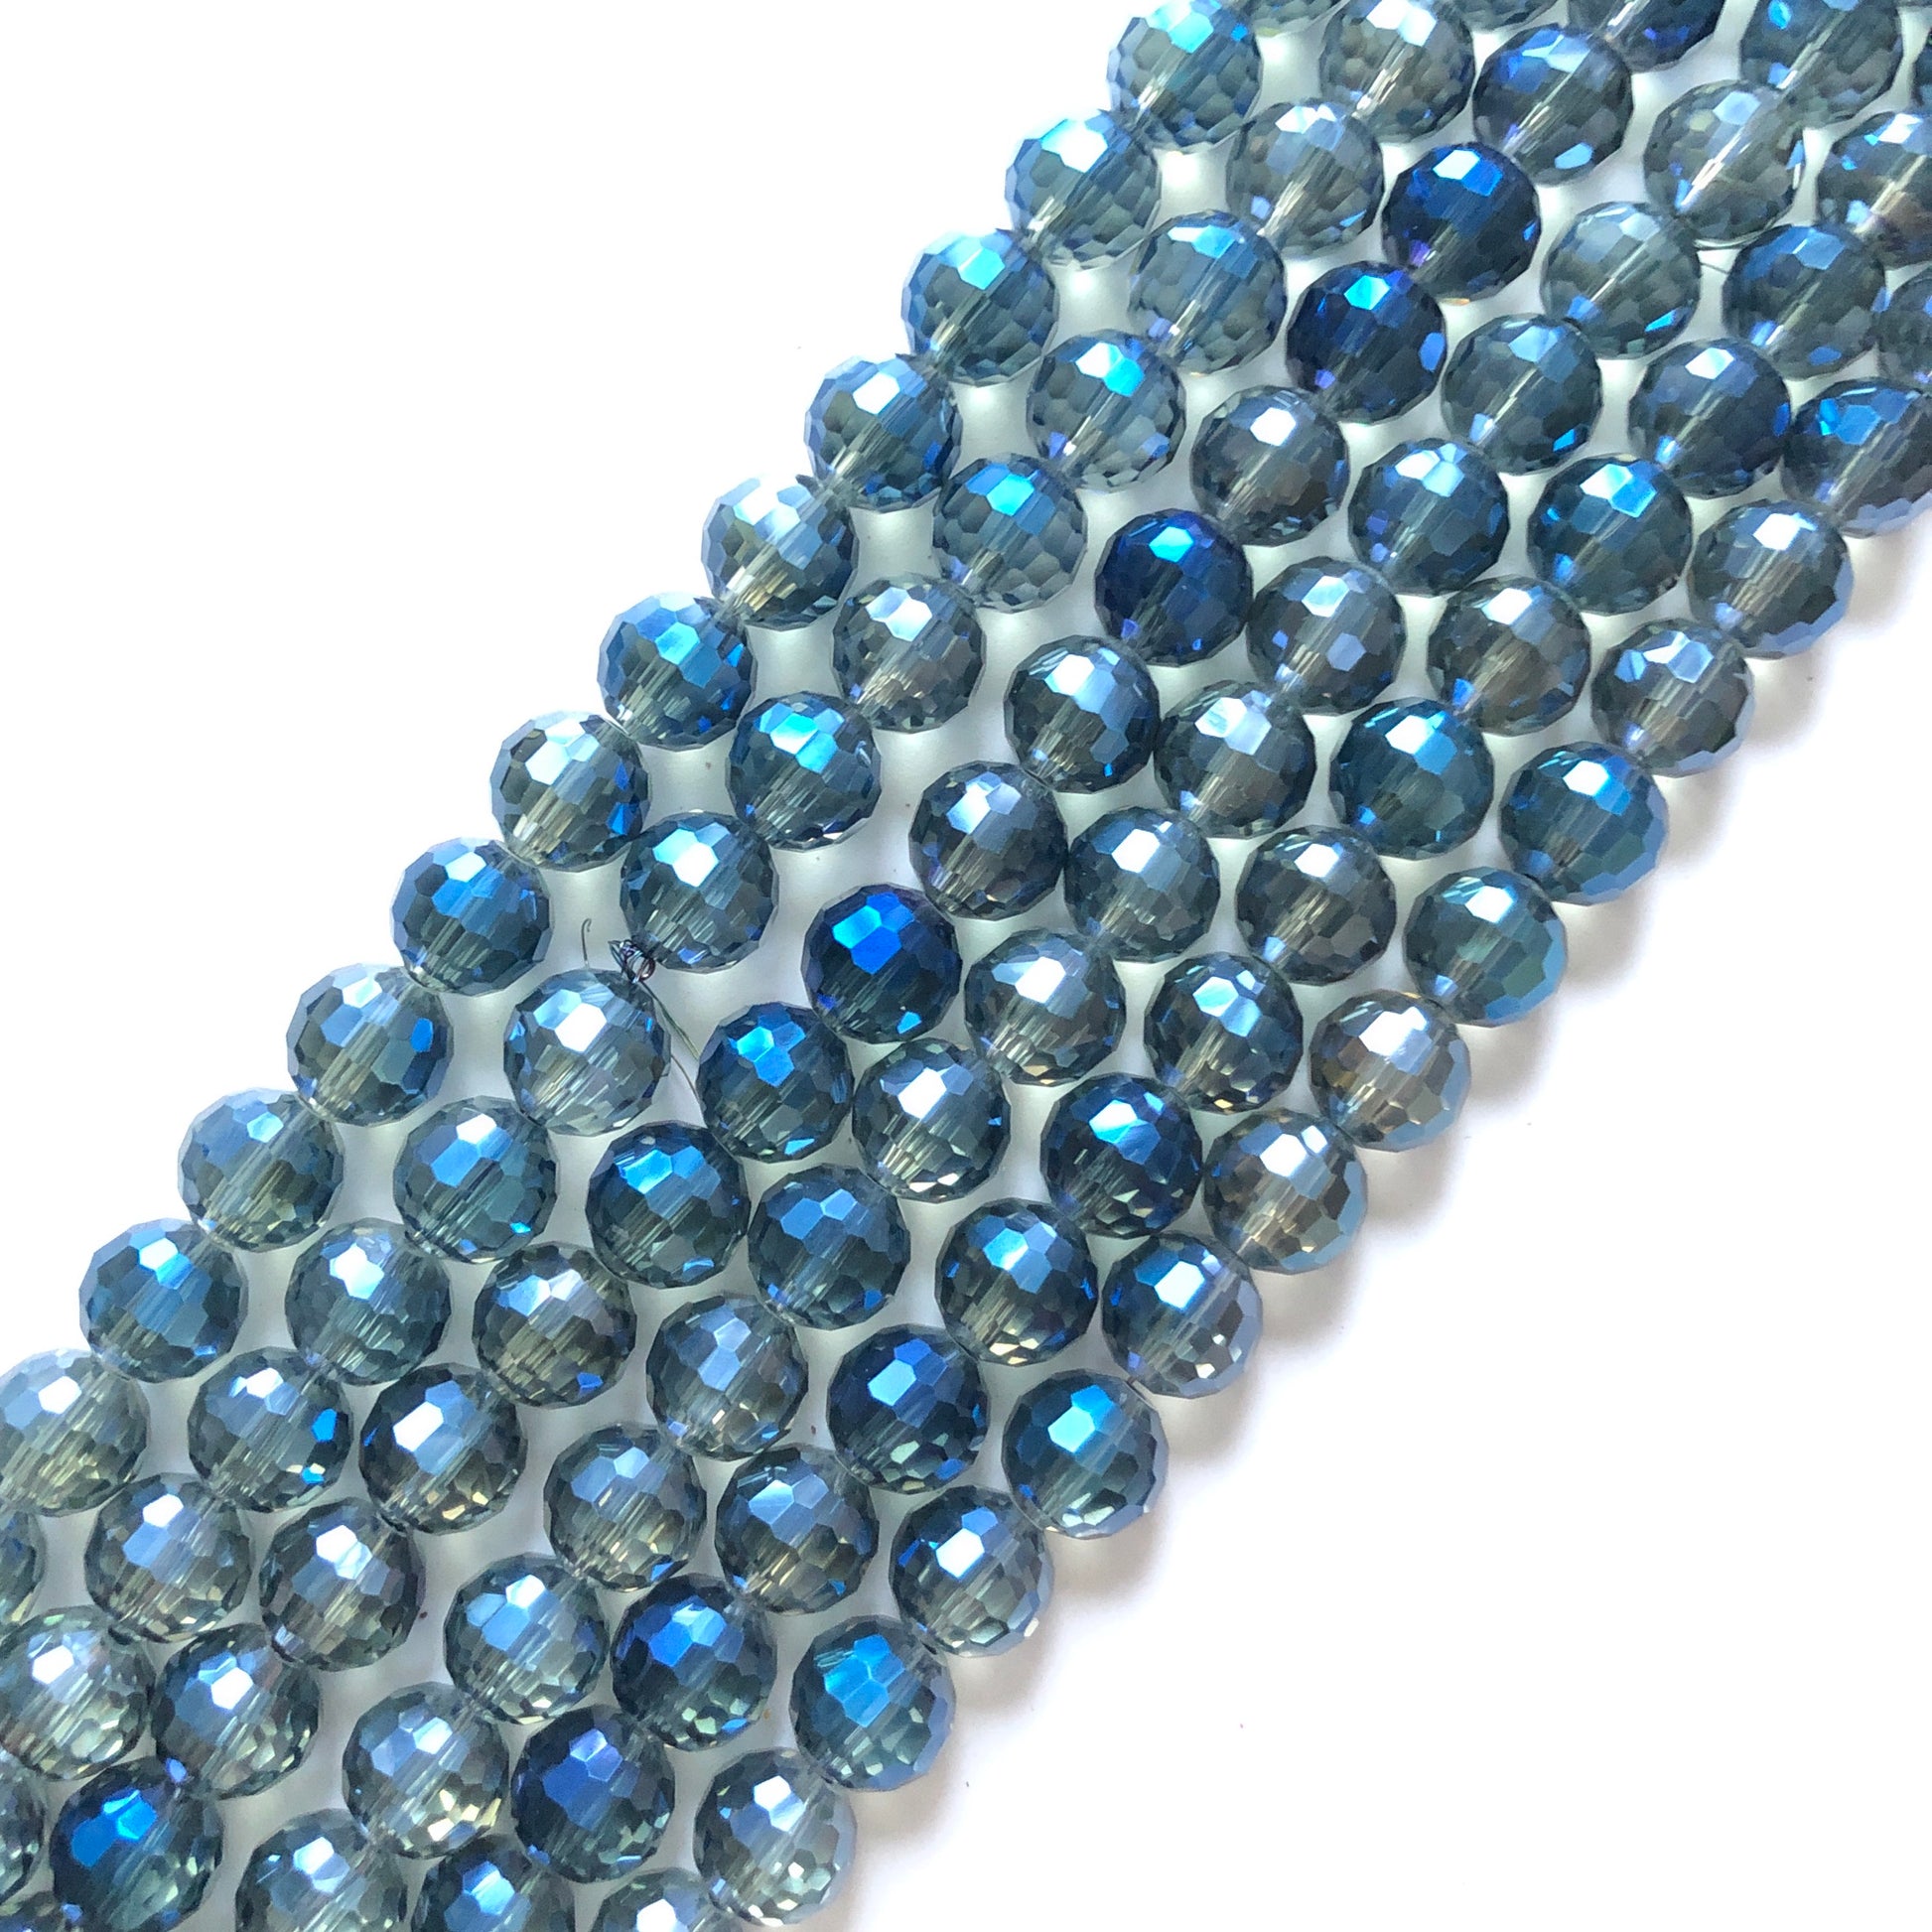 2 Strands/lot 10mm Blue 96 Faceted Glass Beads Glass Beads Faceted Glass Beads Charms Beads Beyond